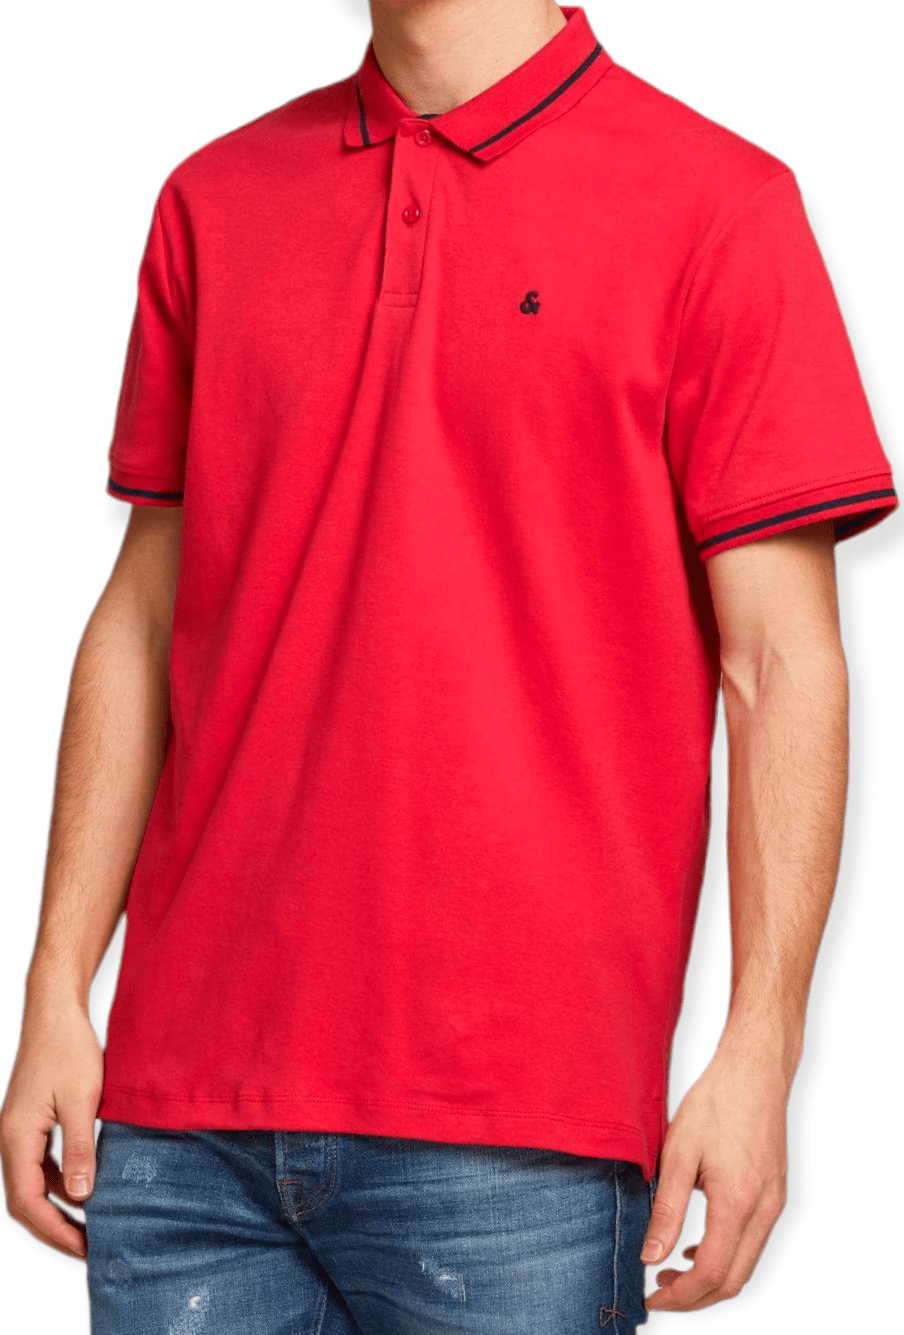 ElOutlet - Men Summer Polo Shirts JJ Polo Shirt - Red